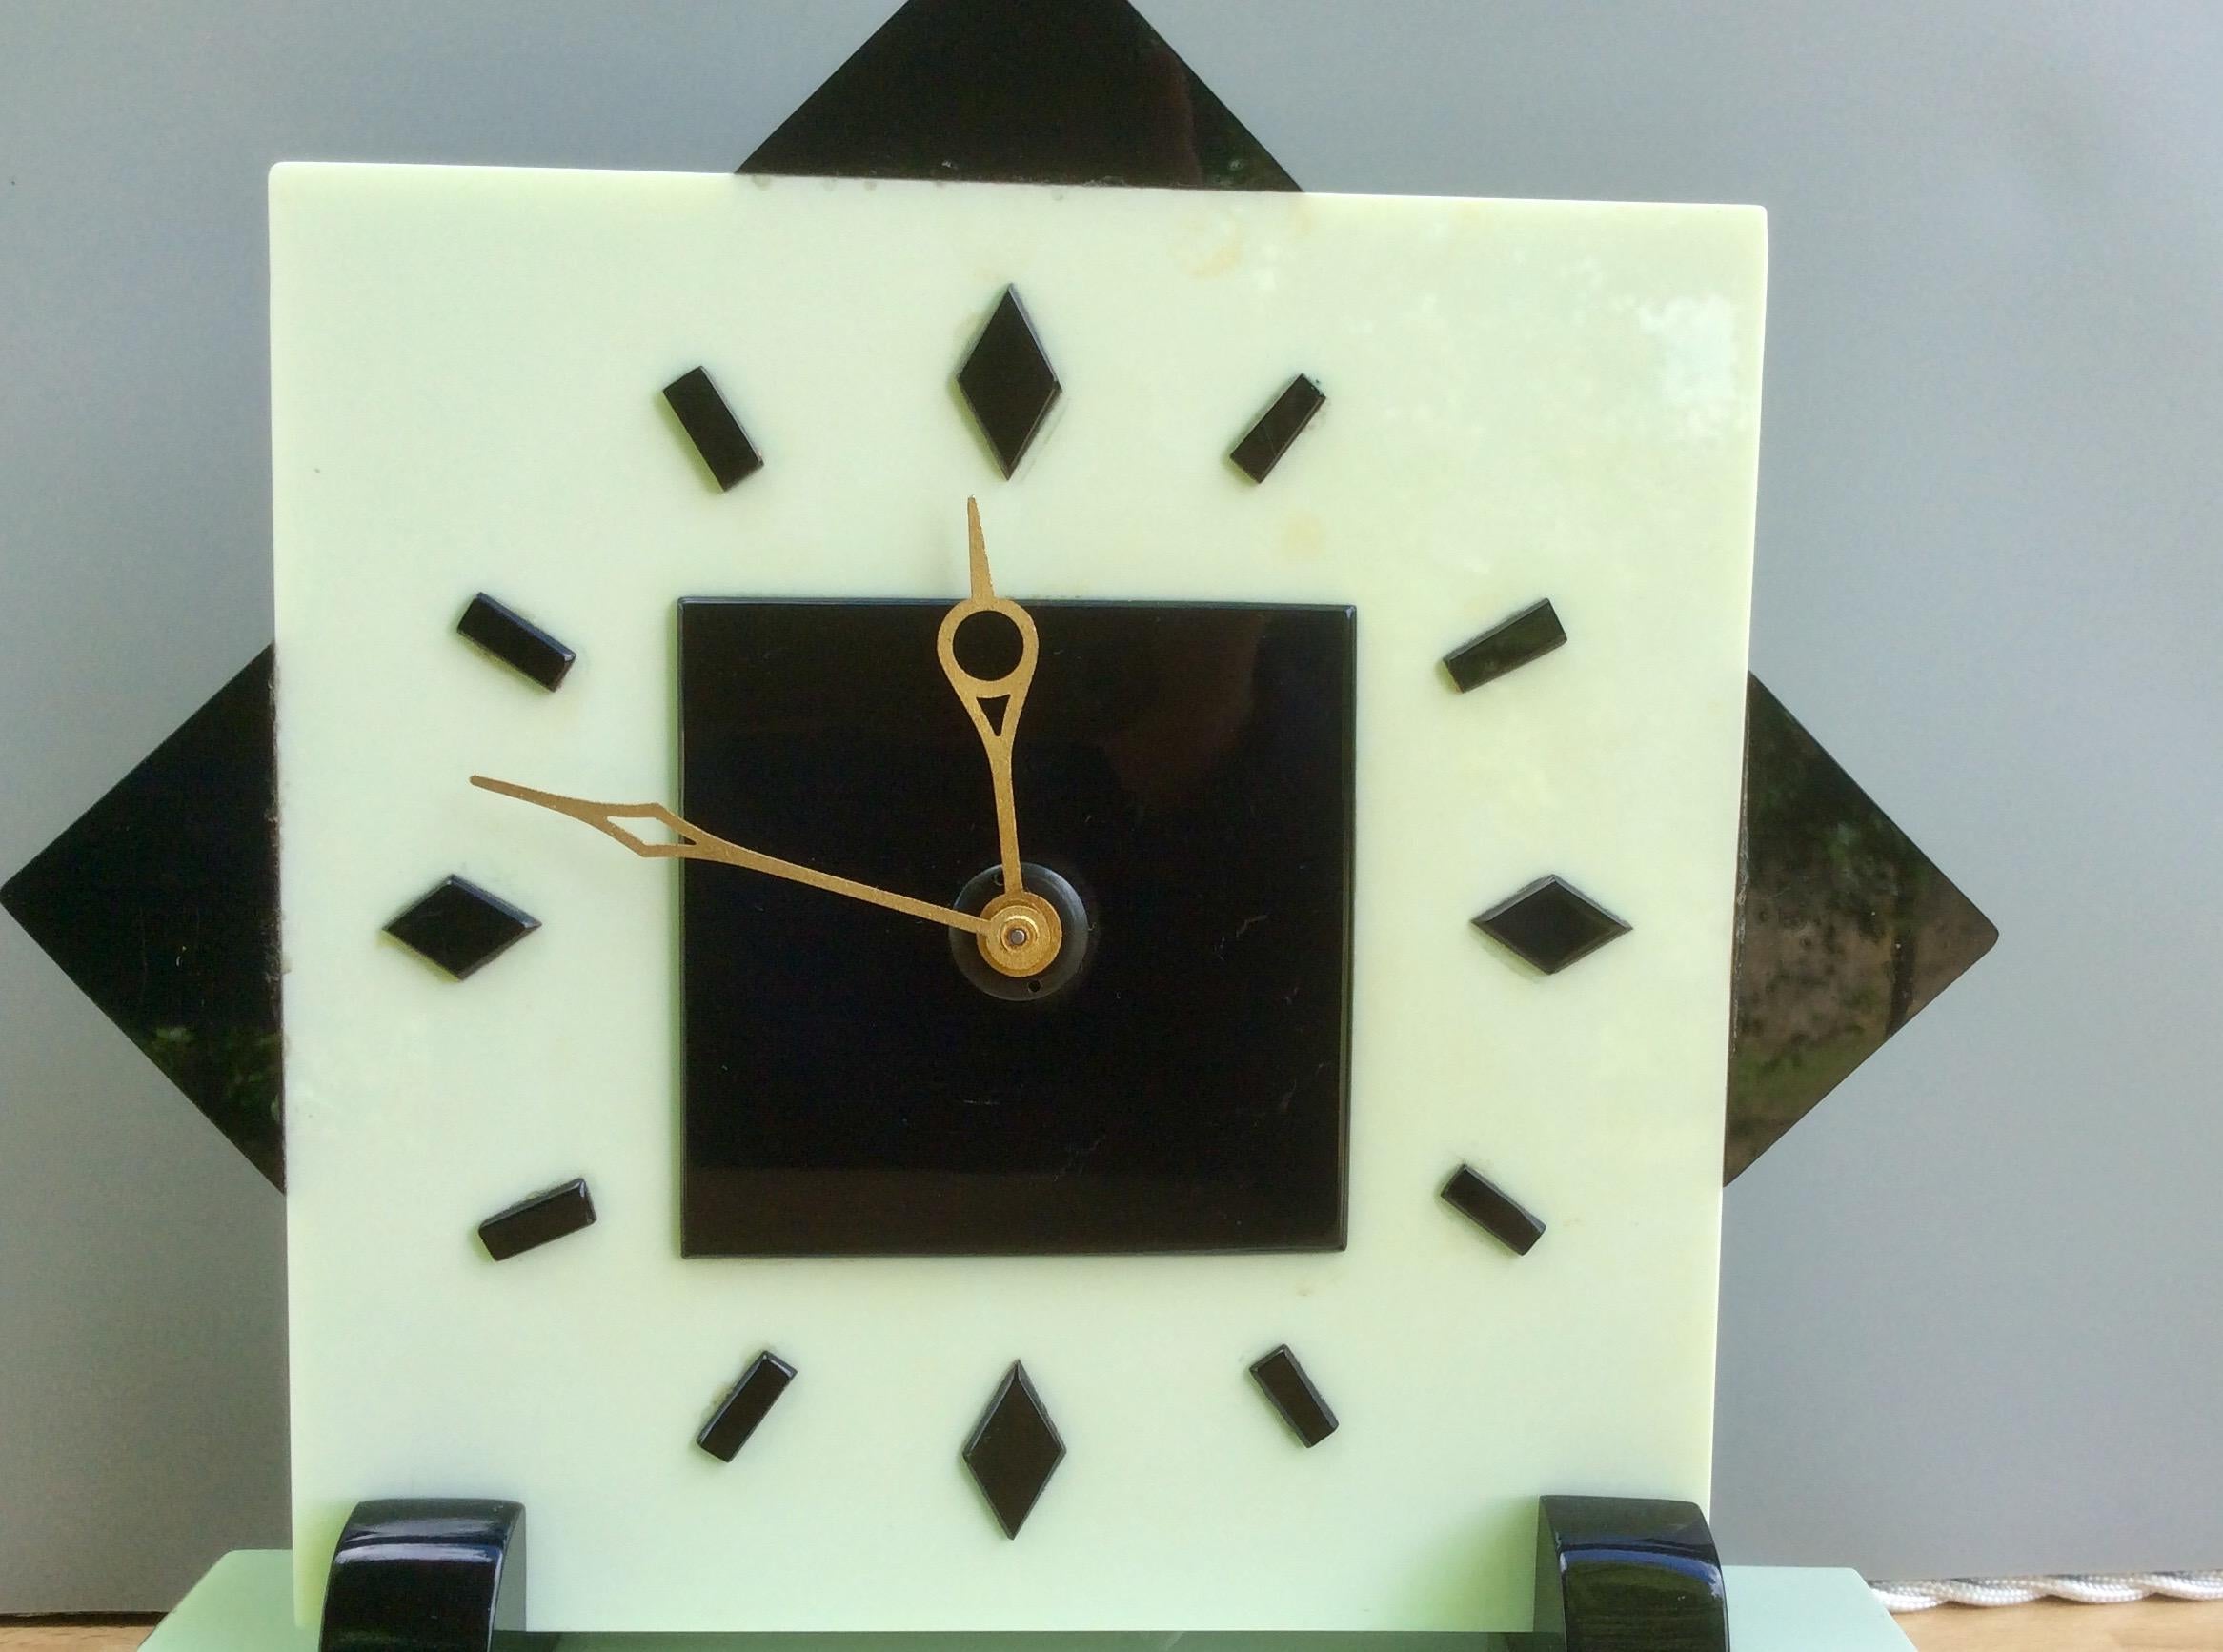 Art Deco timepiece

Art Deco electric timepiece in a light green and black Bakelite case standing on rectangular shaped feet and resting on a stepped two color plinth.

Square dial with baton markers and gilded hands.

Electric movement by